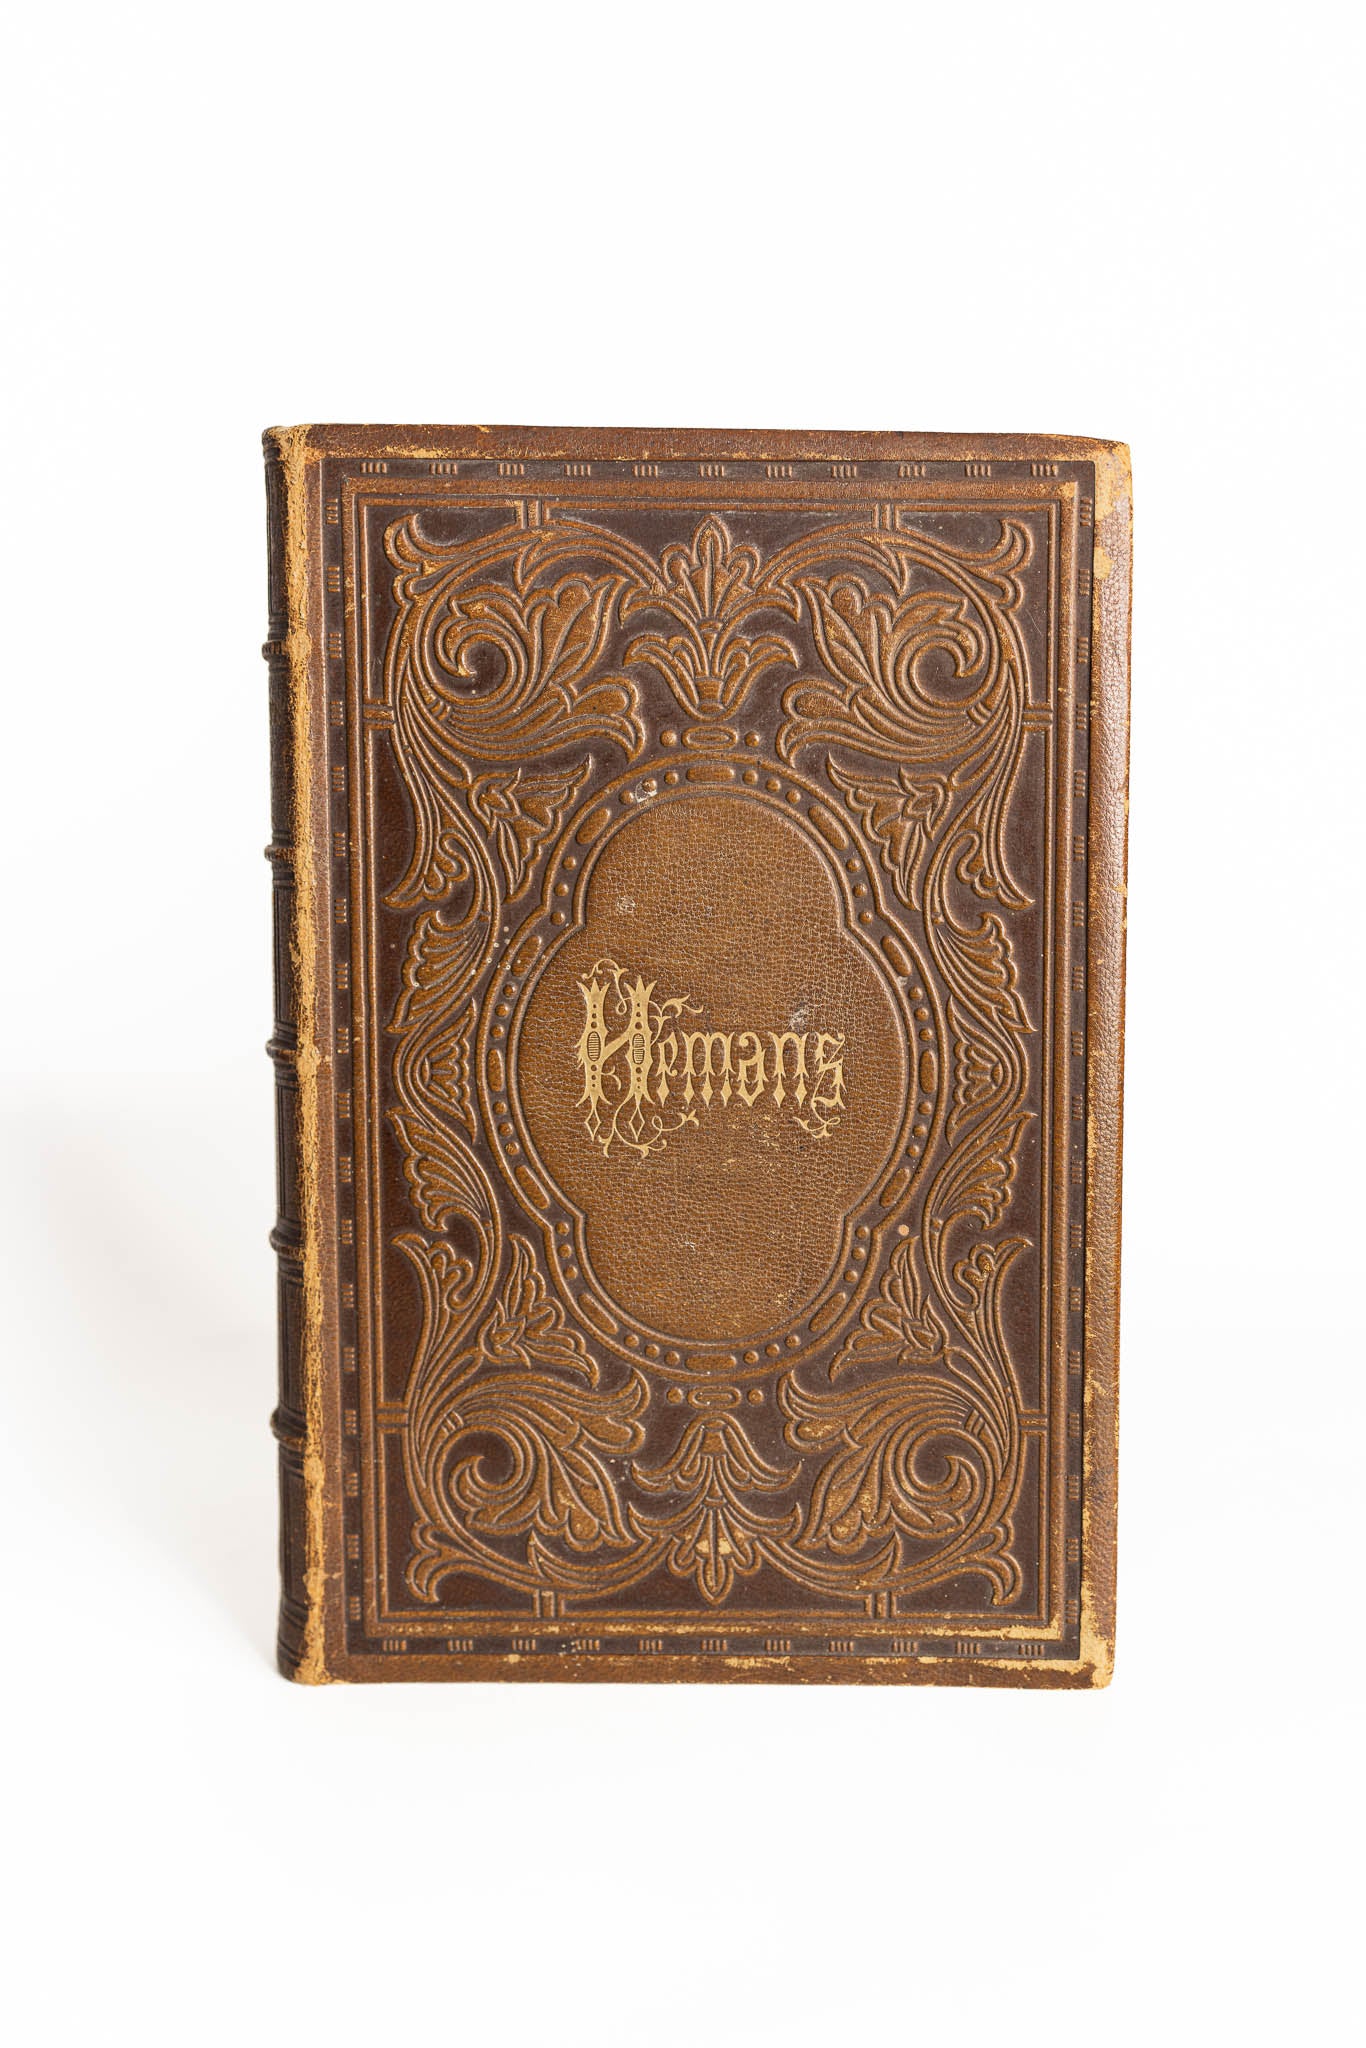 The Poetical Works of Hemans - 1859